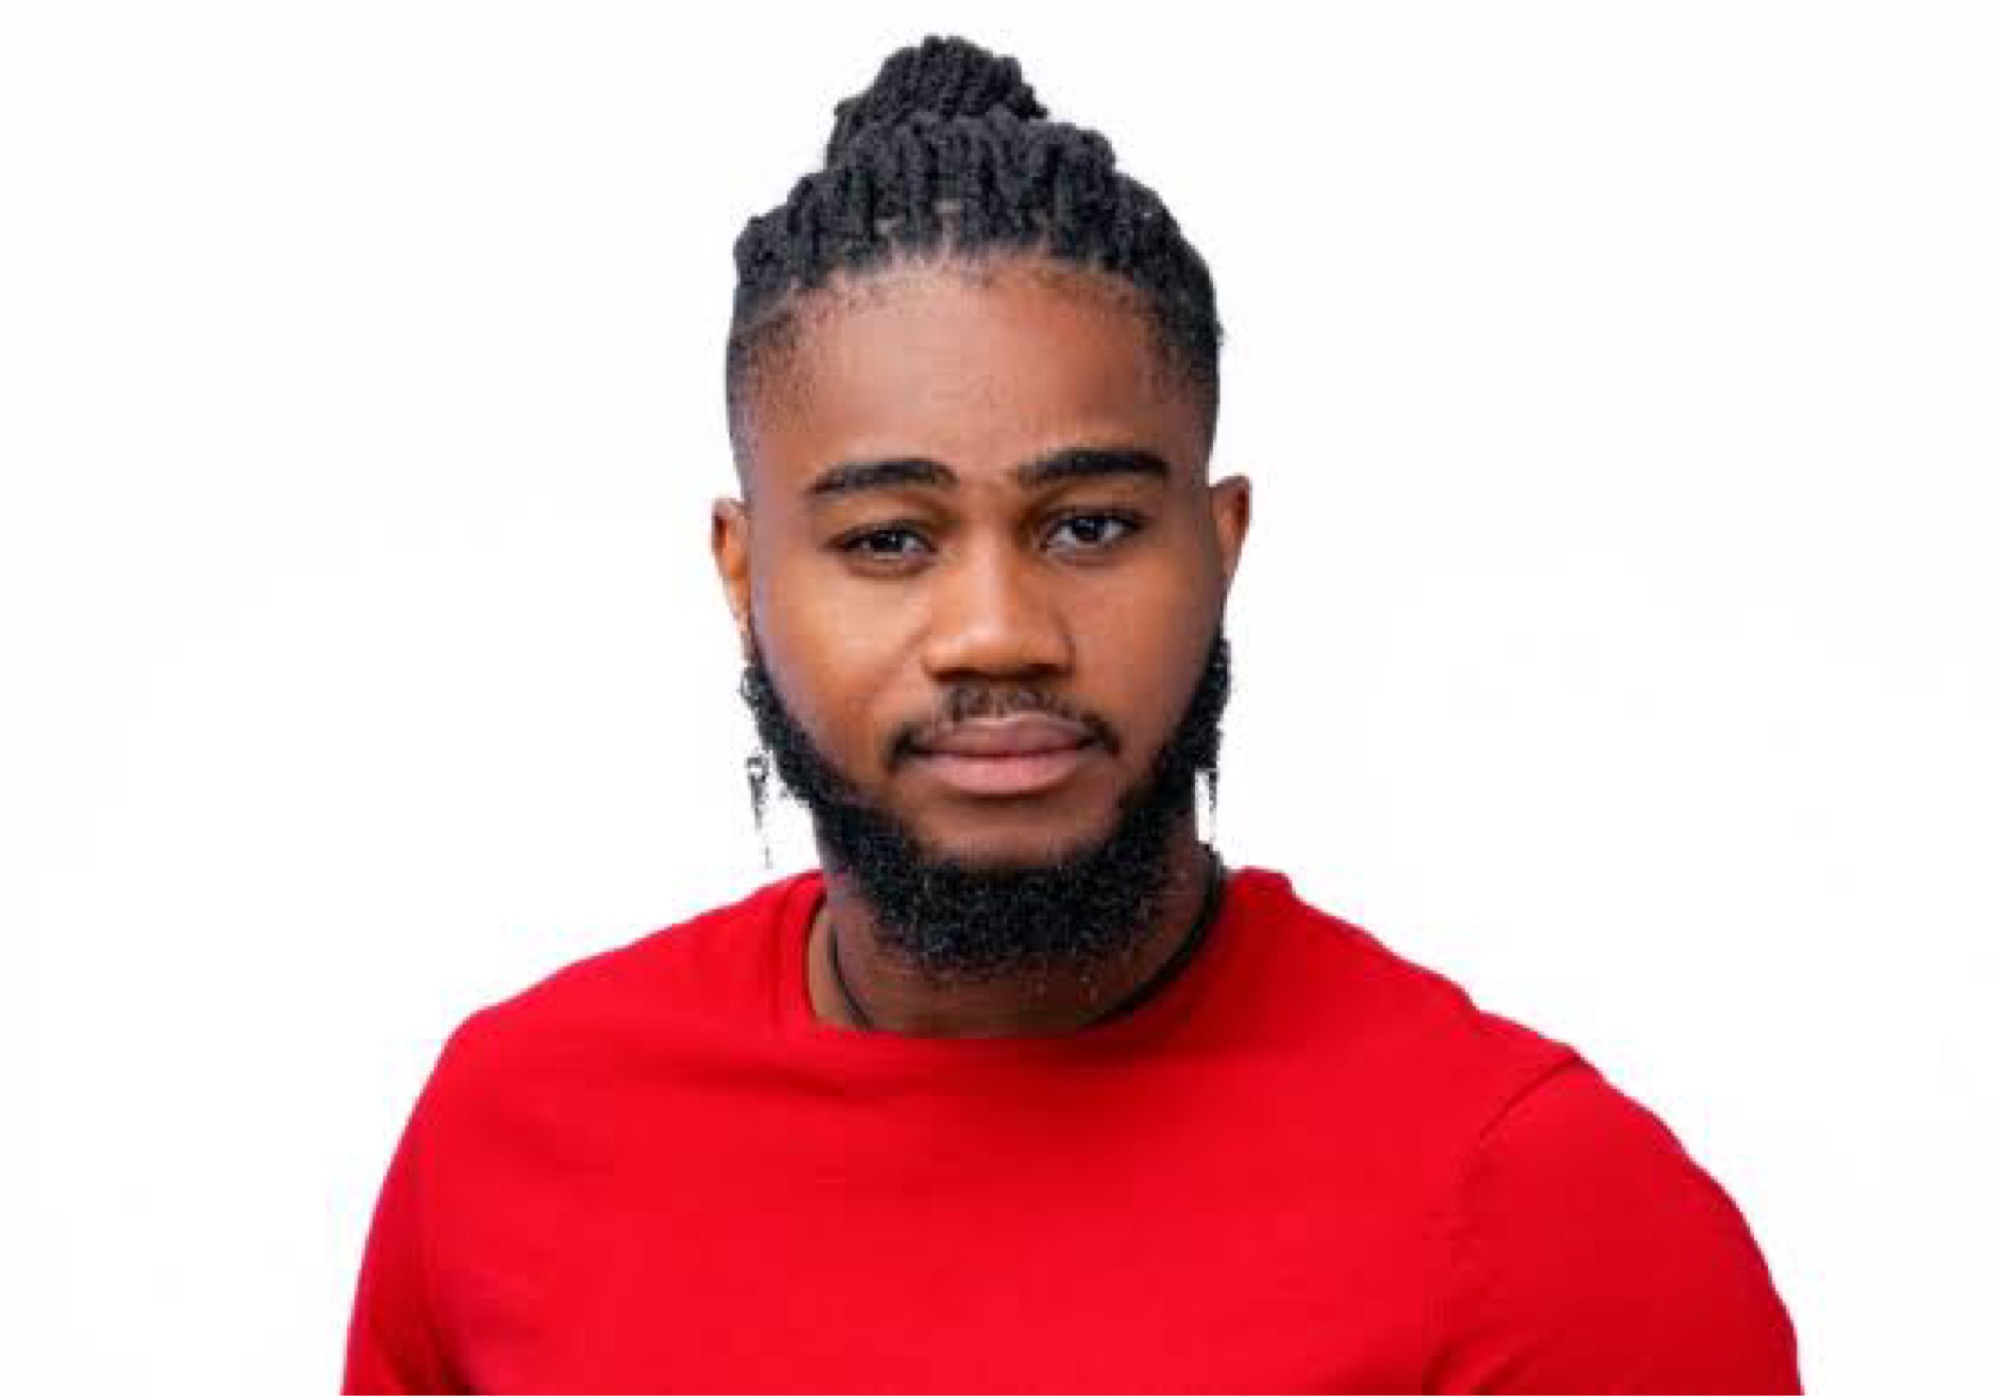 BBNaija’s Praise Reacts After Being Dragged For Not Securing Any Endorsement Deal